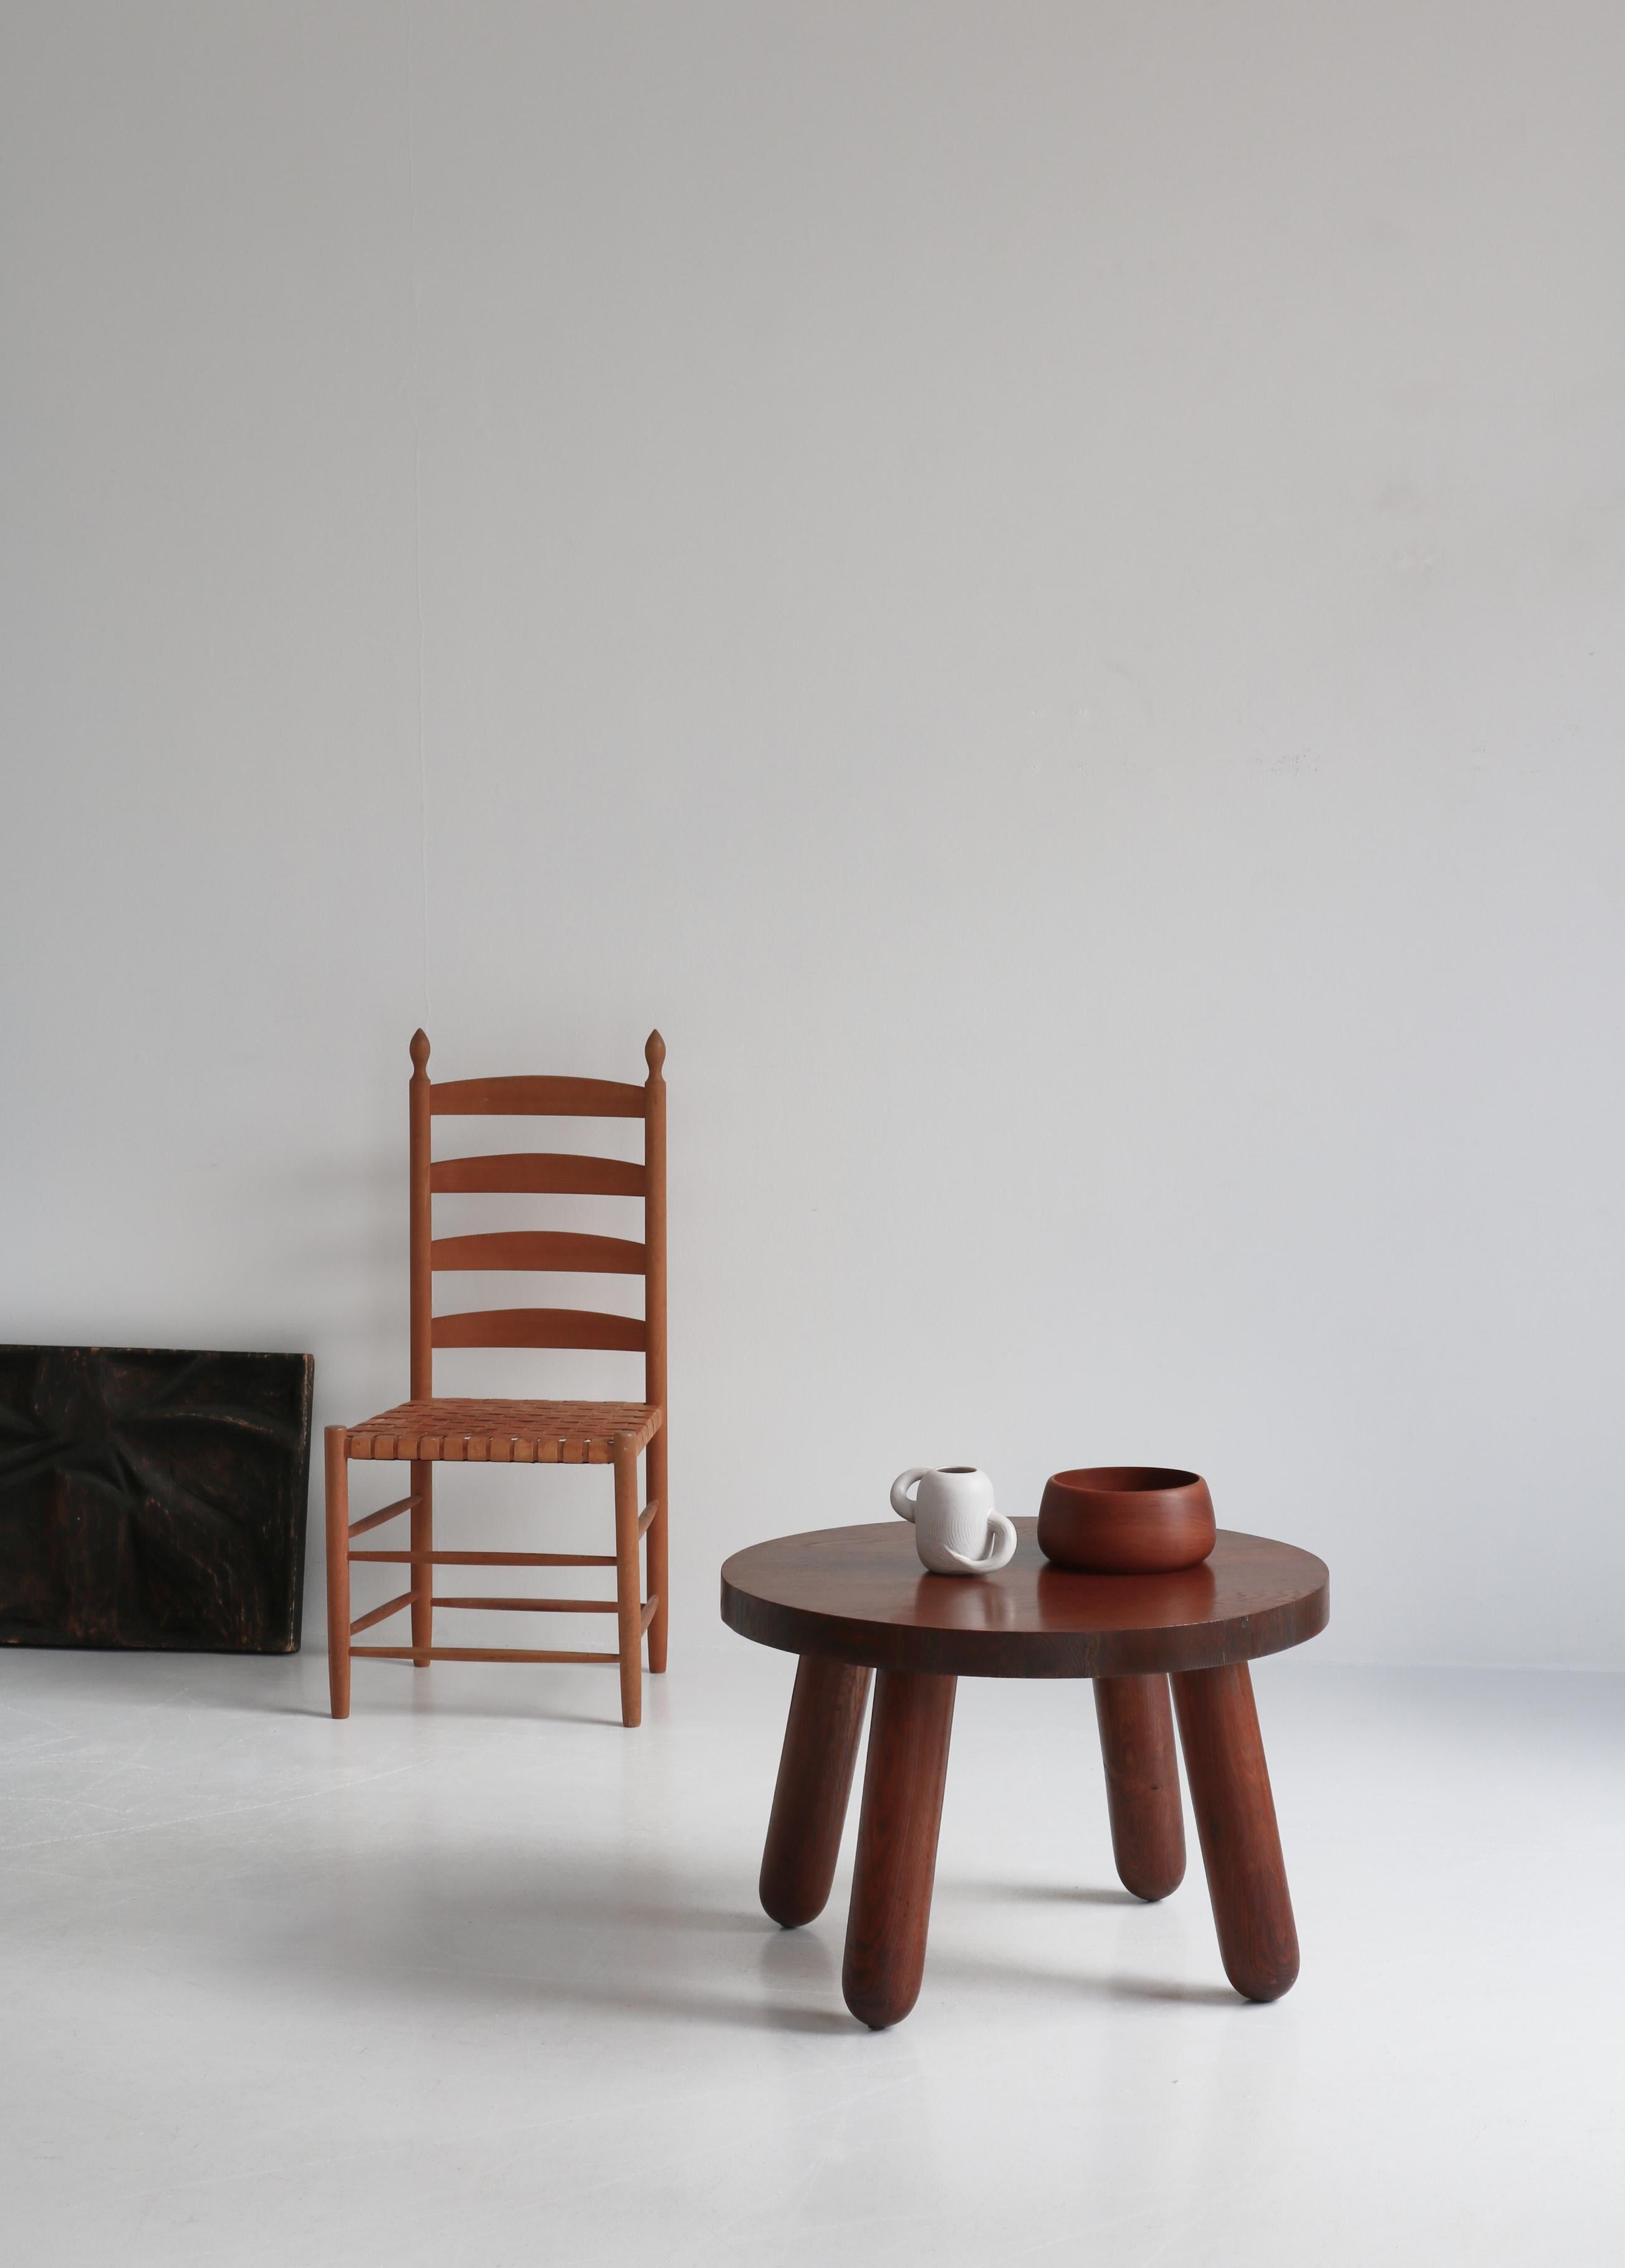 Vintage Scandinavian Shaker Chair in Beech and Leather Seat, Denmark, 1960s For Sale 9